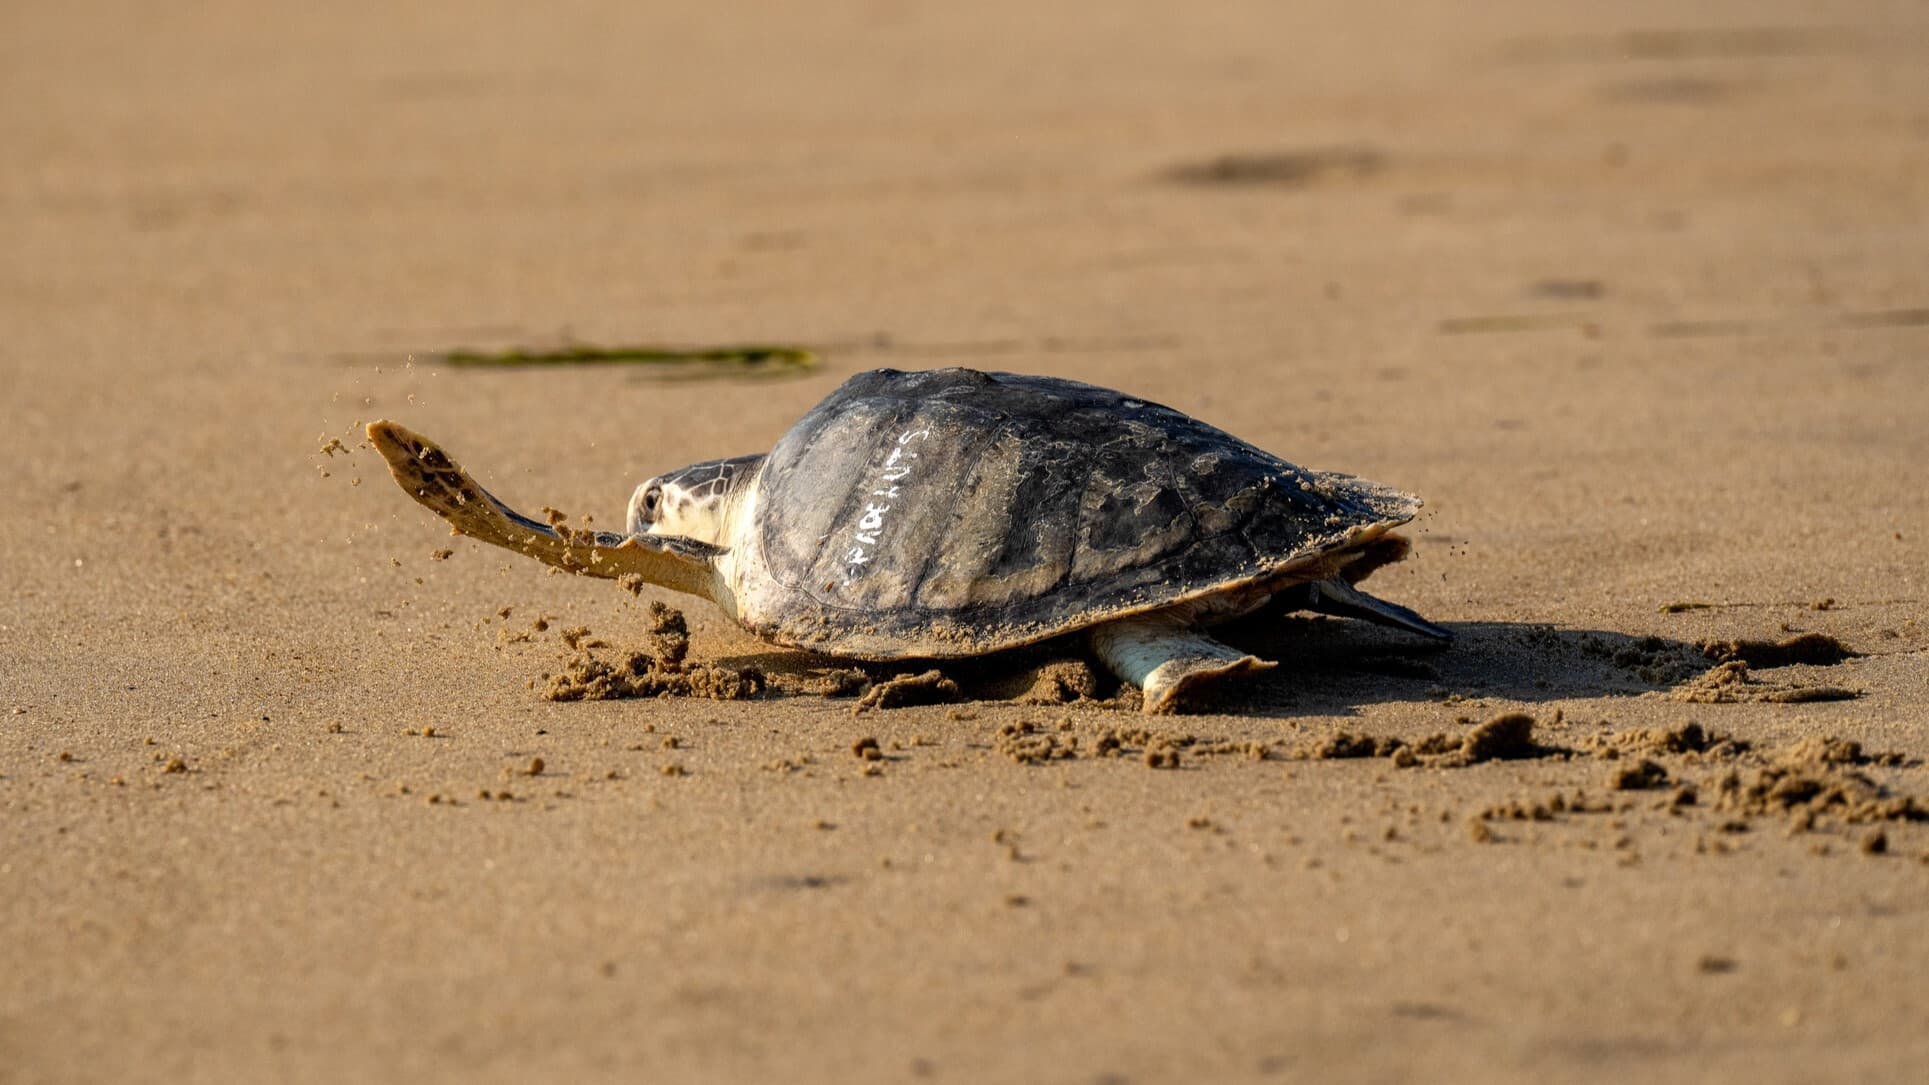 A Kemps ridley sea turtle moves across the sand after it is released at the beach following rehabilitation by Stranding Response